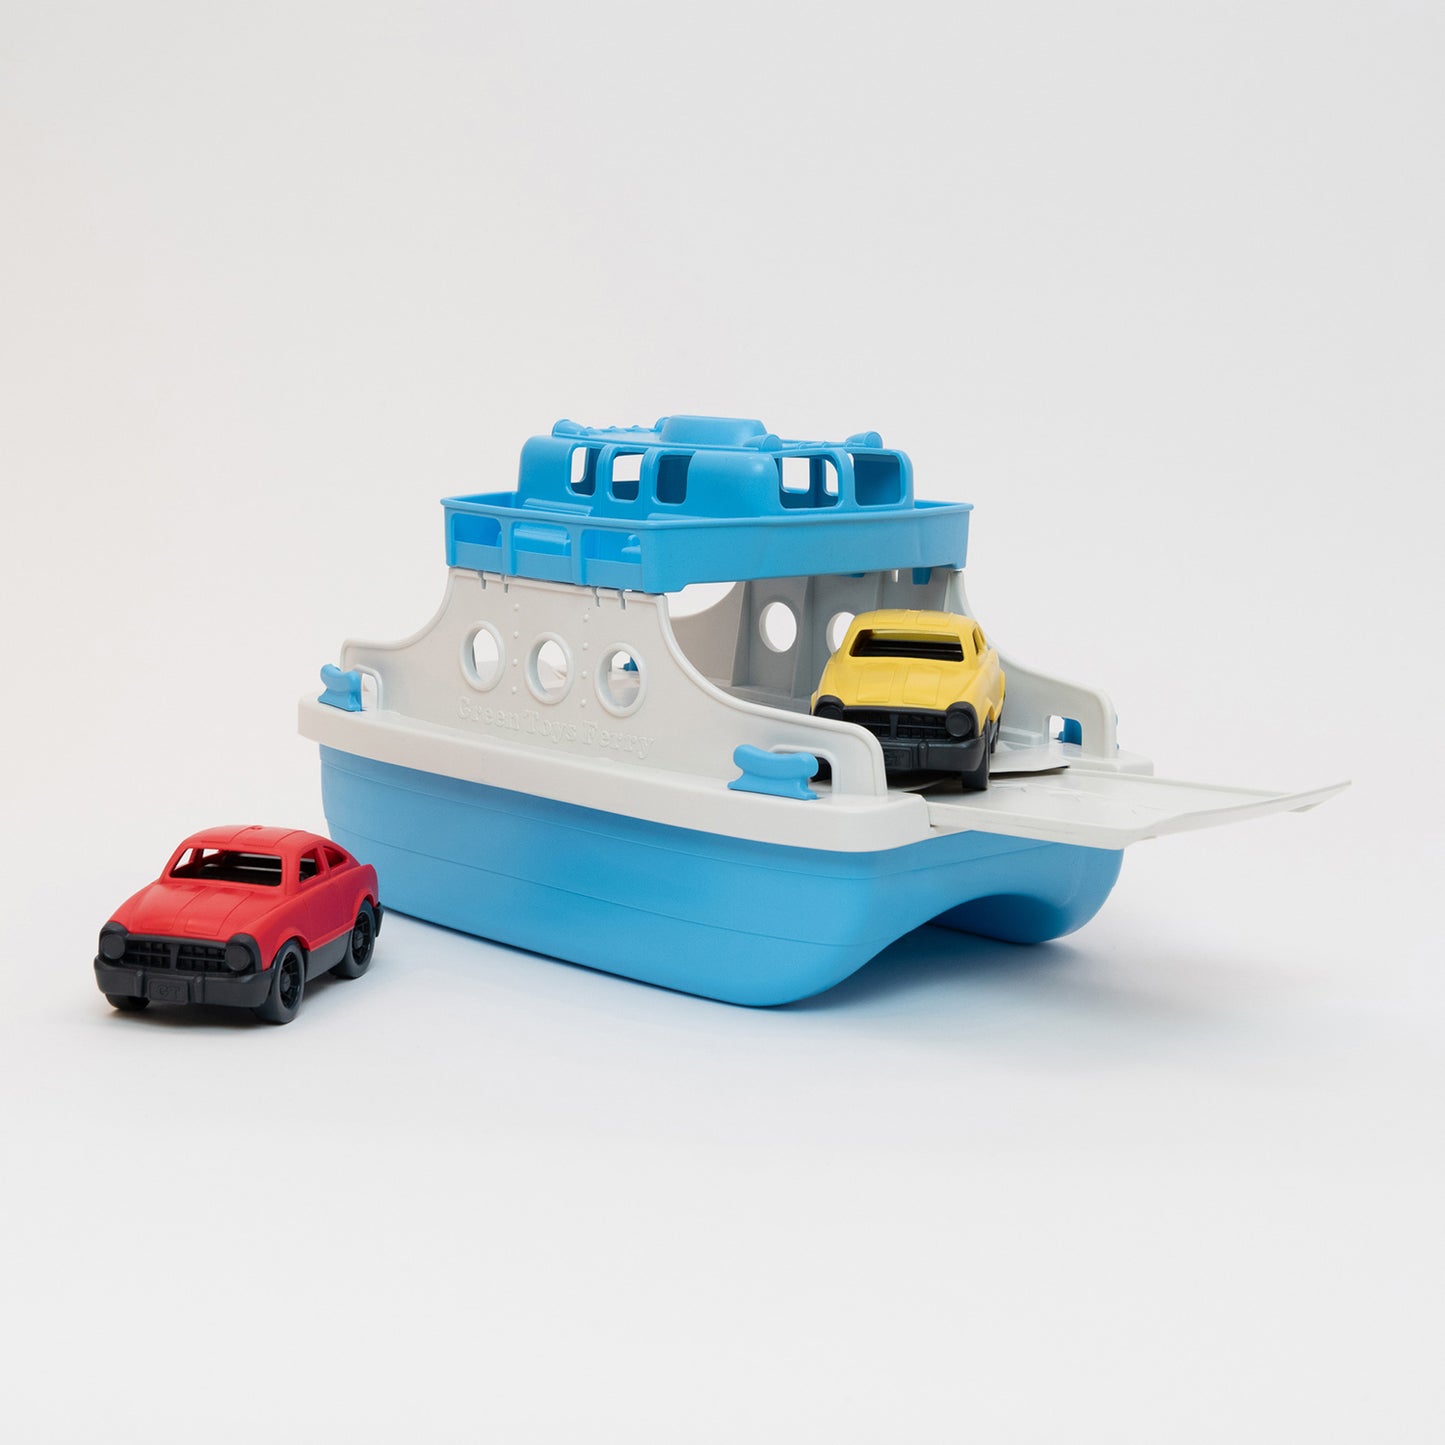 A photo of a plastic white and blue ferry with two plastic toy cars, one yellow and one red.